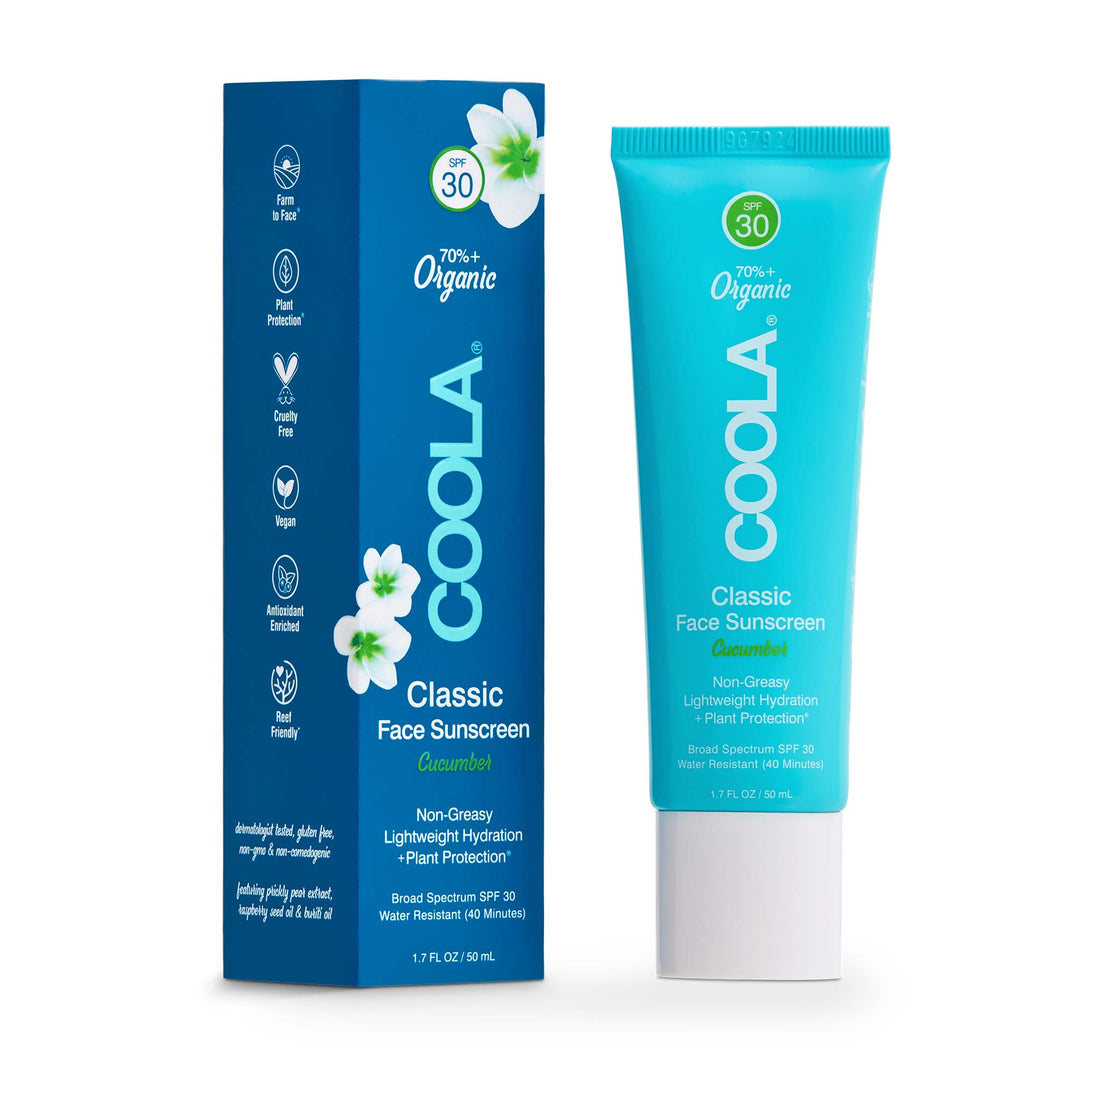 Coola face sunscreen spf 30 cucumber scent is non-greasy, lightweight and great for daily sun protection.